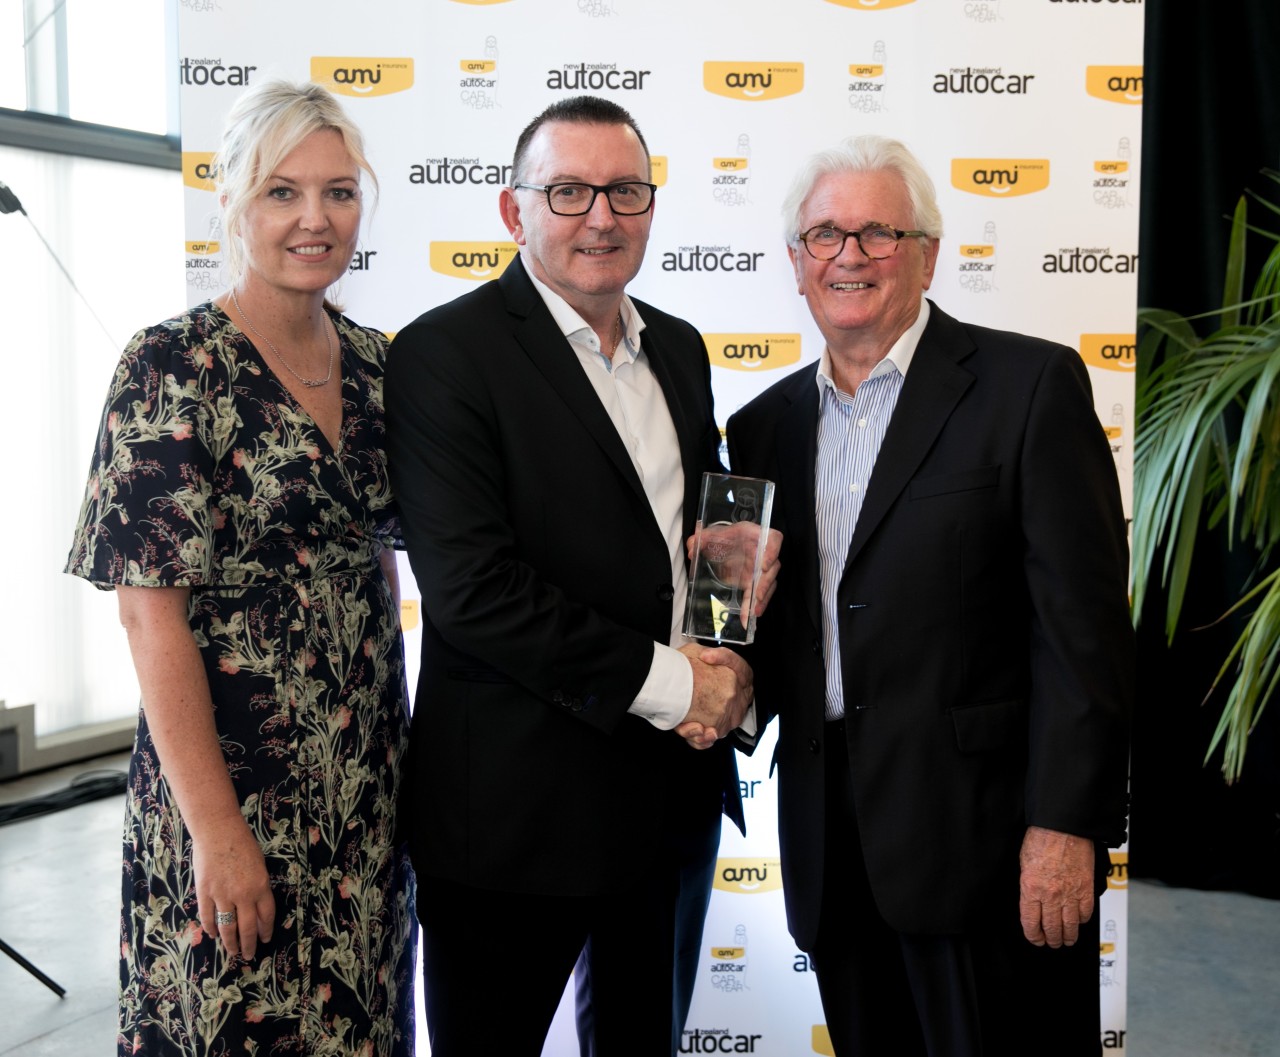 Subaru of NZ Managing Director Wallis Dumper (centre) receives the AMI Autocar class award for the Subaru XV from AMI Community Engagement Manager Eve Whitwell and NZ Autocar Publisher Mark Petch. PHOTO: CARMEN BIRD.